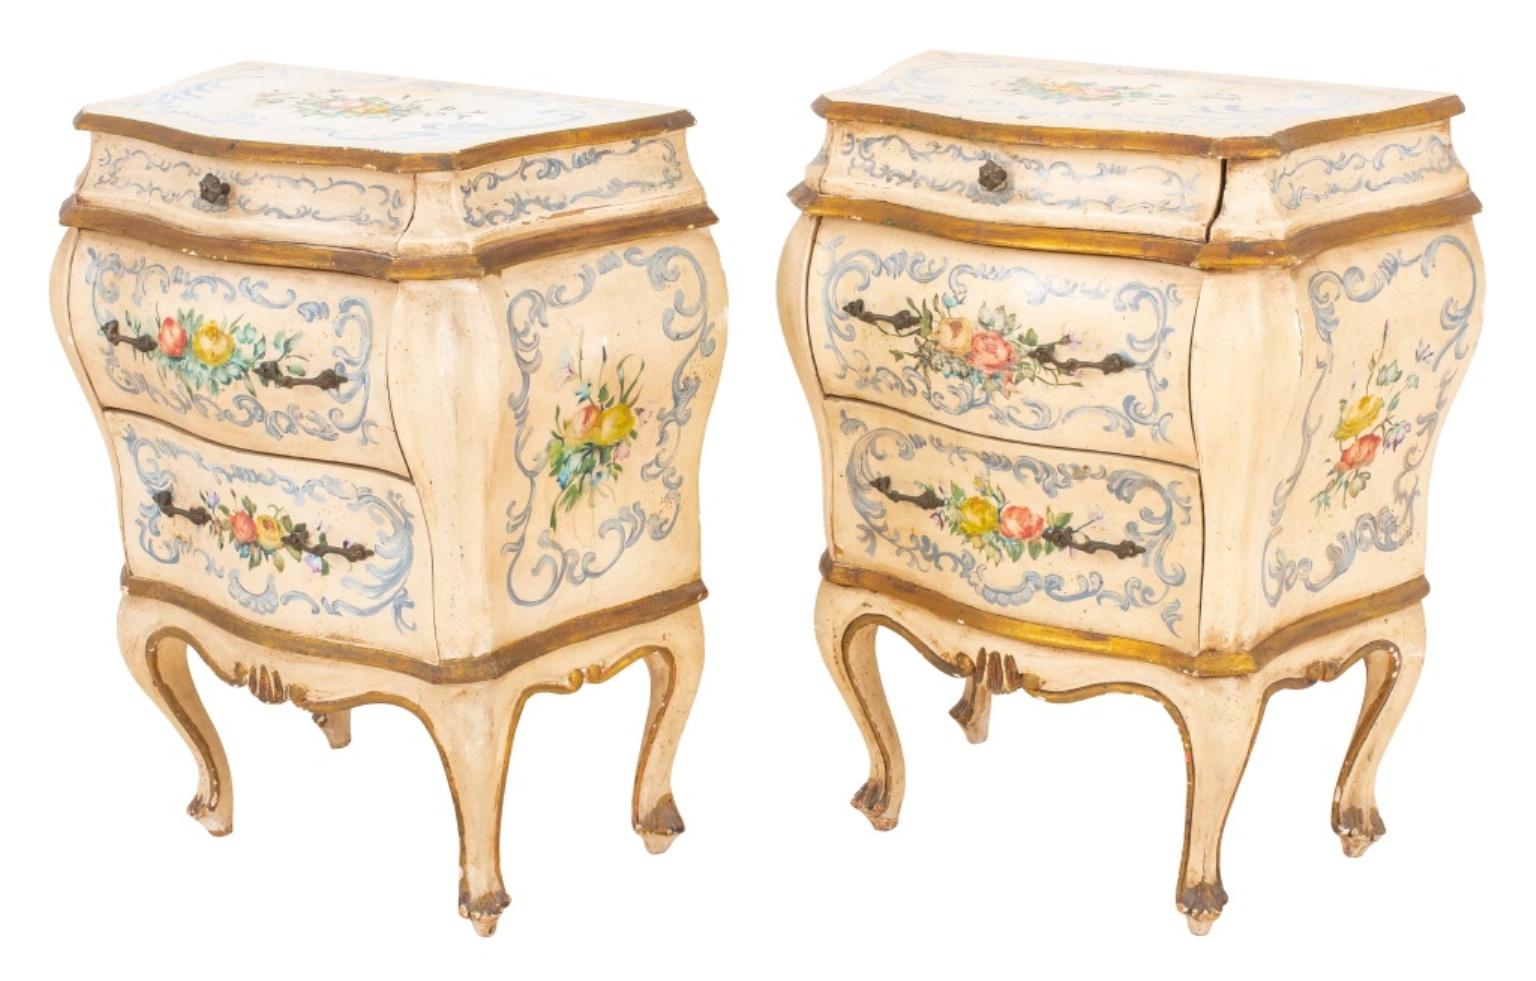 Venetian Rococo style small painted three drawer commodes, a pair, of bombe form and with allover polychrome floral and rocaille decoration, each with single shallow drawer above two deep, likely nightstands. 28